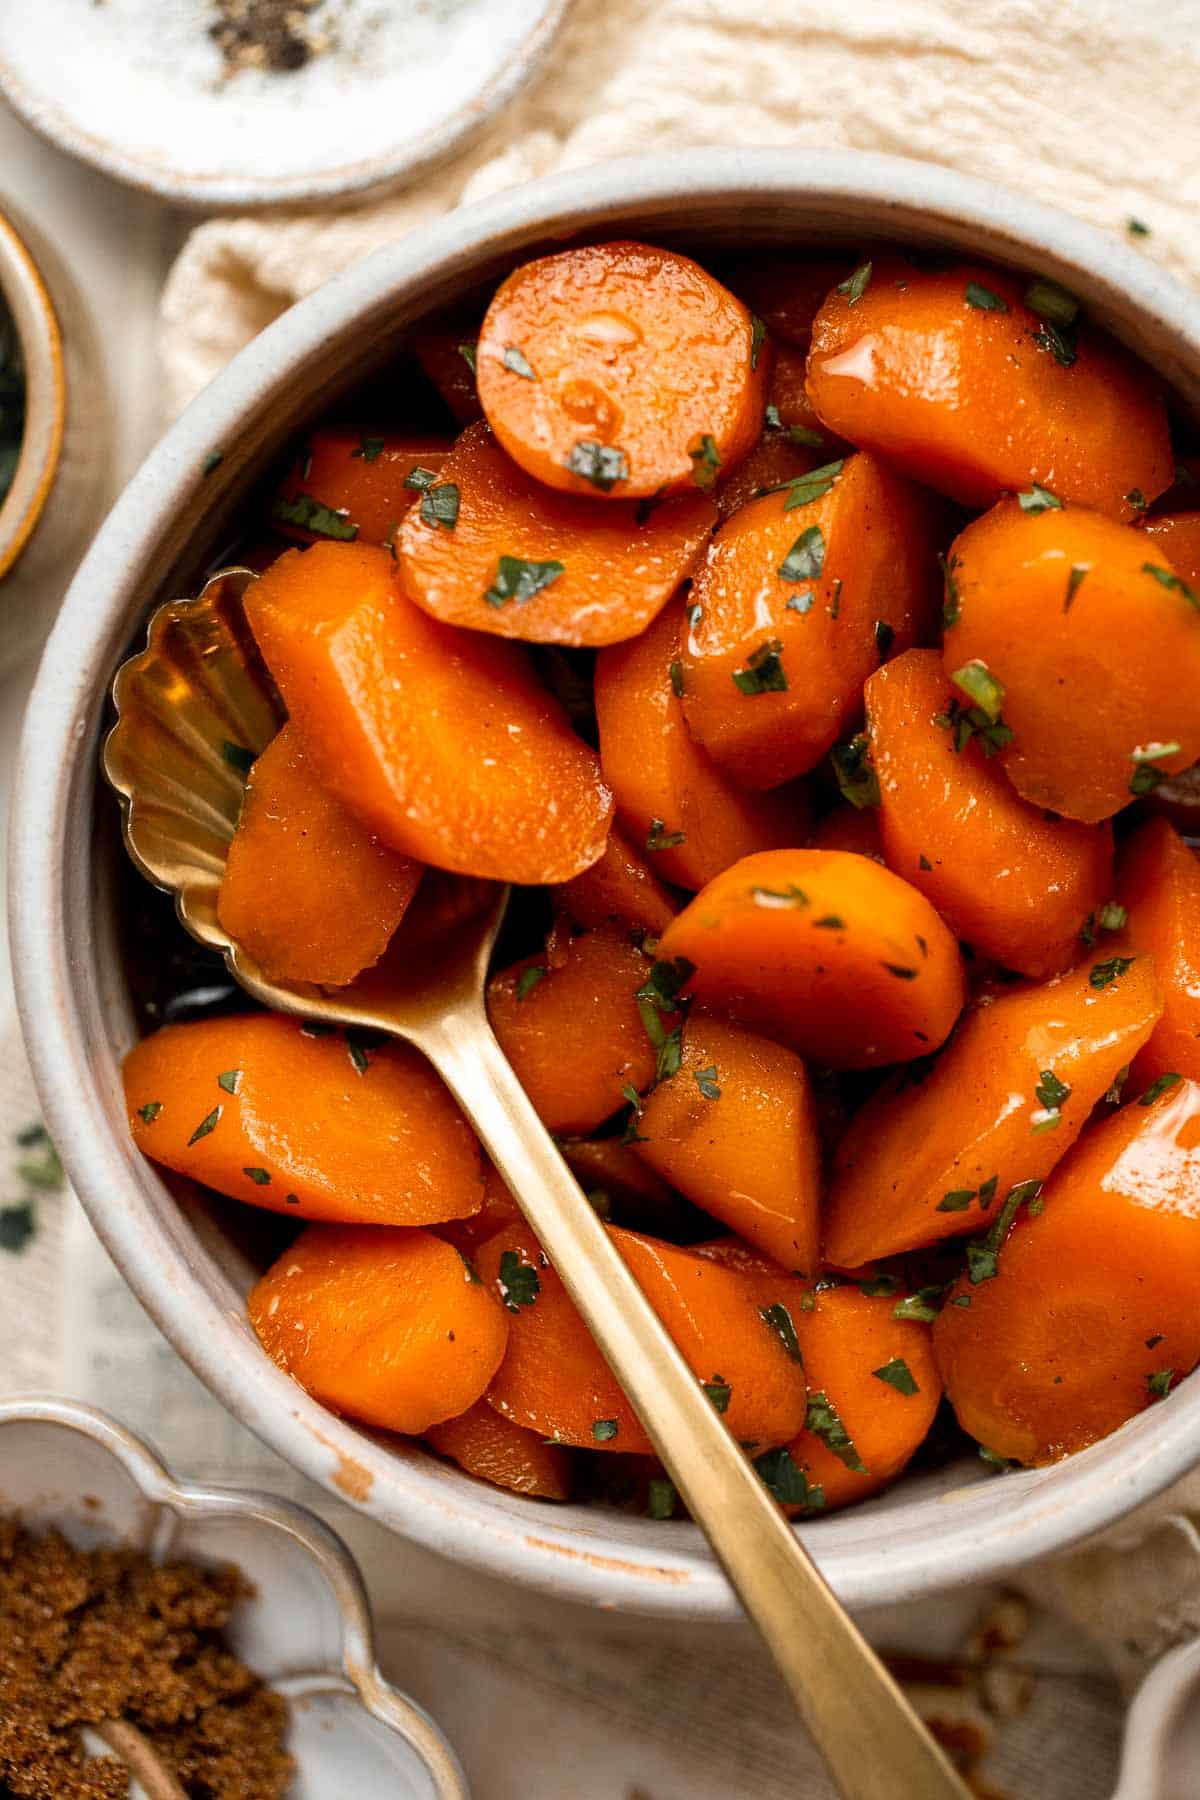 Candied Carrots are a delicious side dish that is sweetened with a simple brown sugar sauce before serving  on your holiday table. It's so easy! | aheadofthyme.com